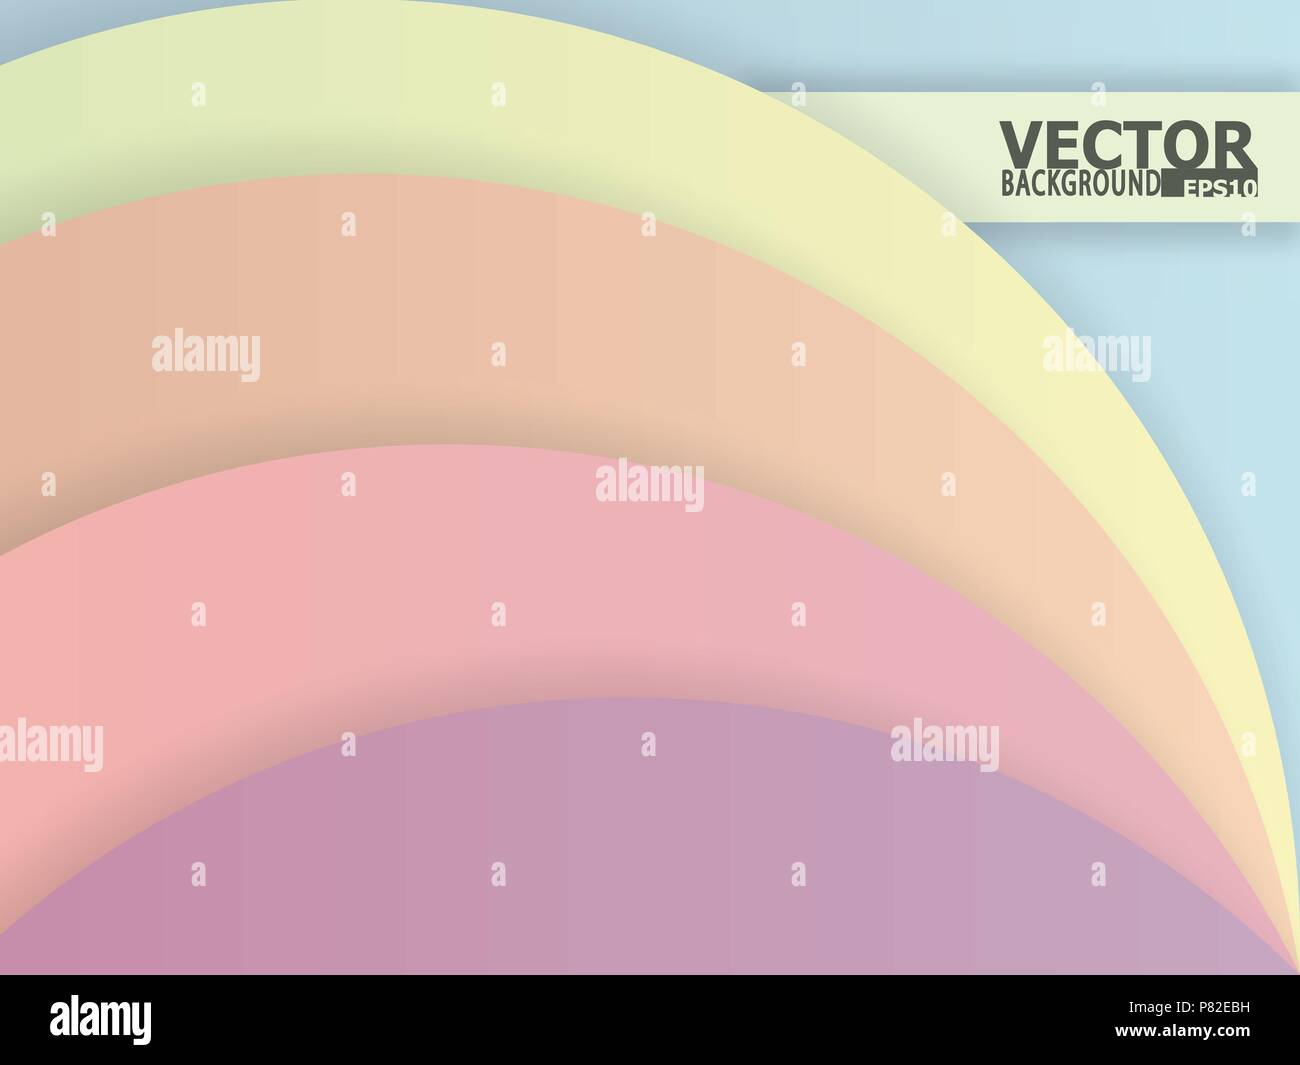 vector of different color in pastel shade tone rounded for background. vector illustration ESP10 Stock Vector